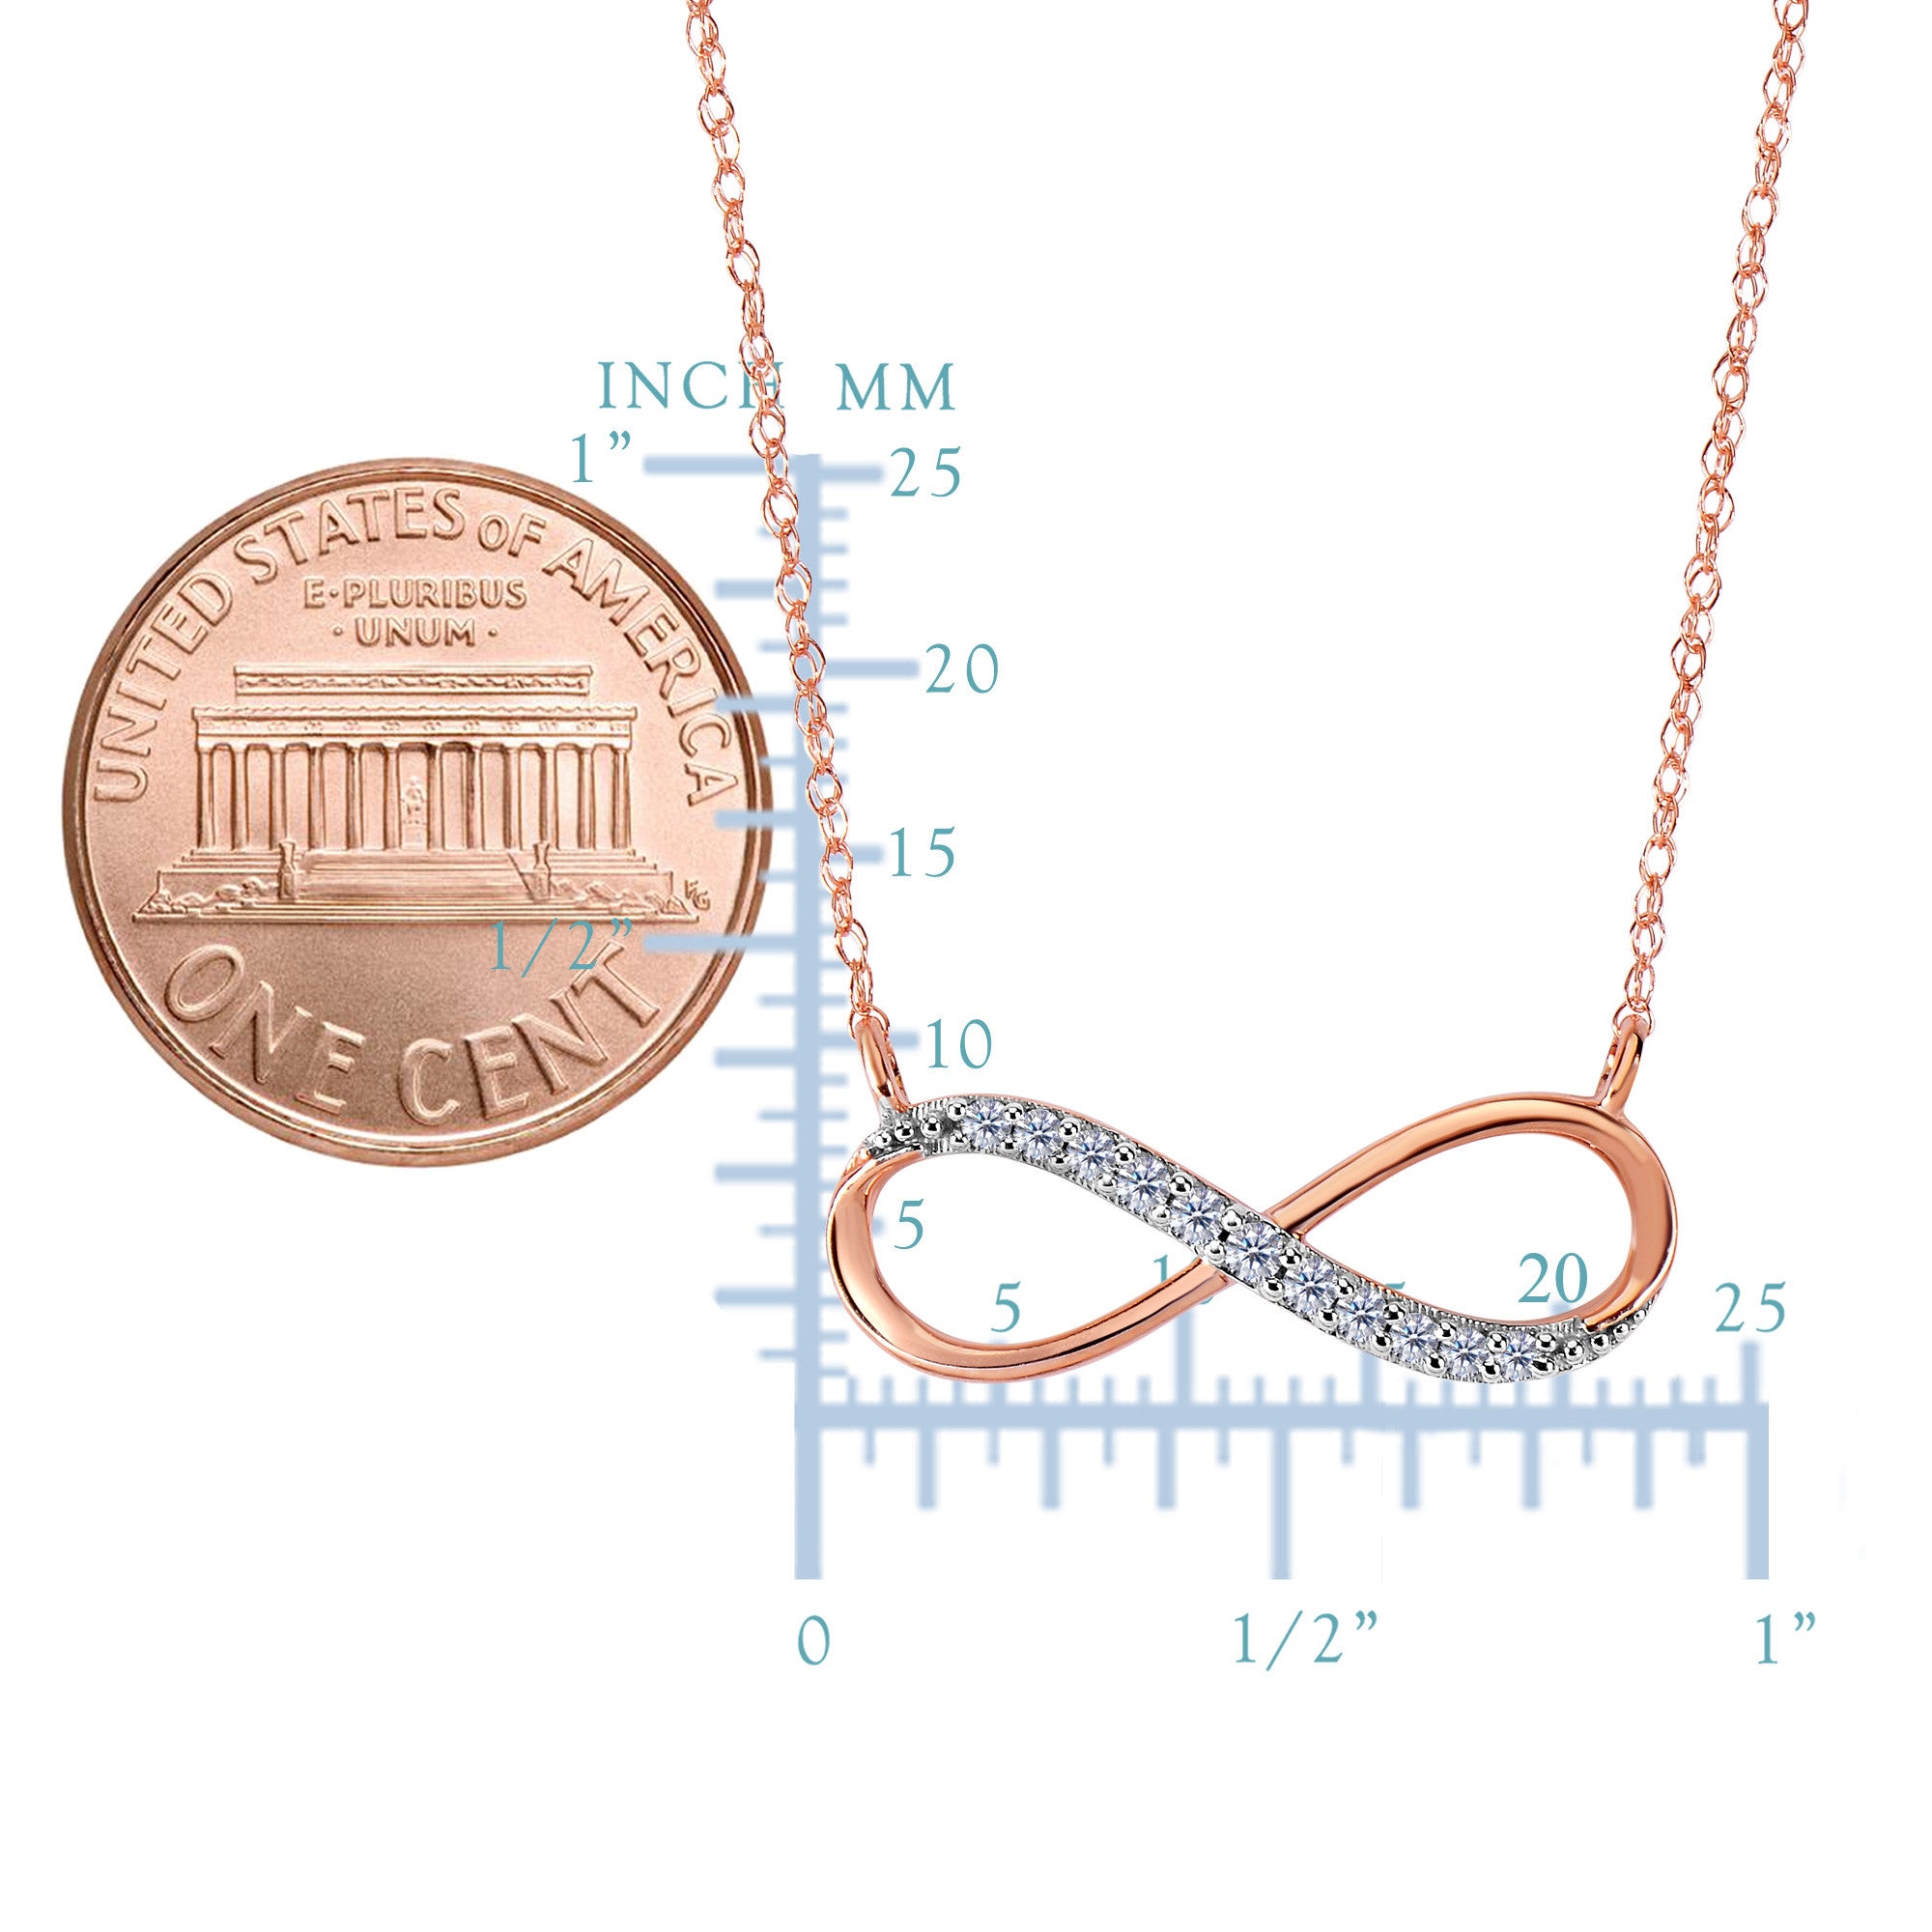 14K Rose Gold With 0.10 Ct Diamonds Infinity Necklace - 18 Inches - JewelryAffairs
 - 2